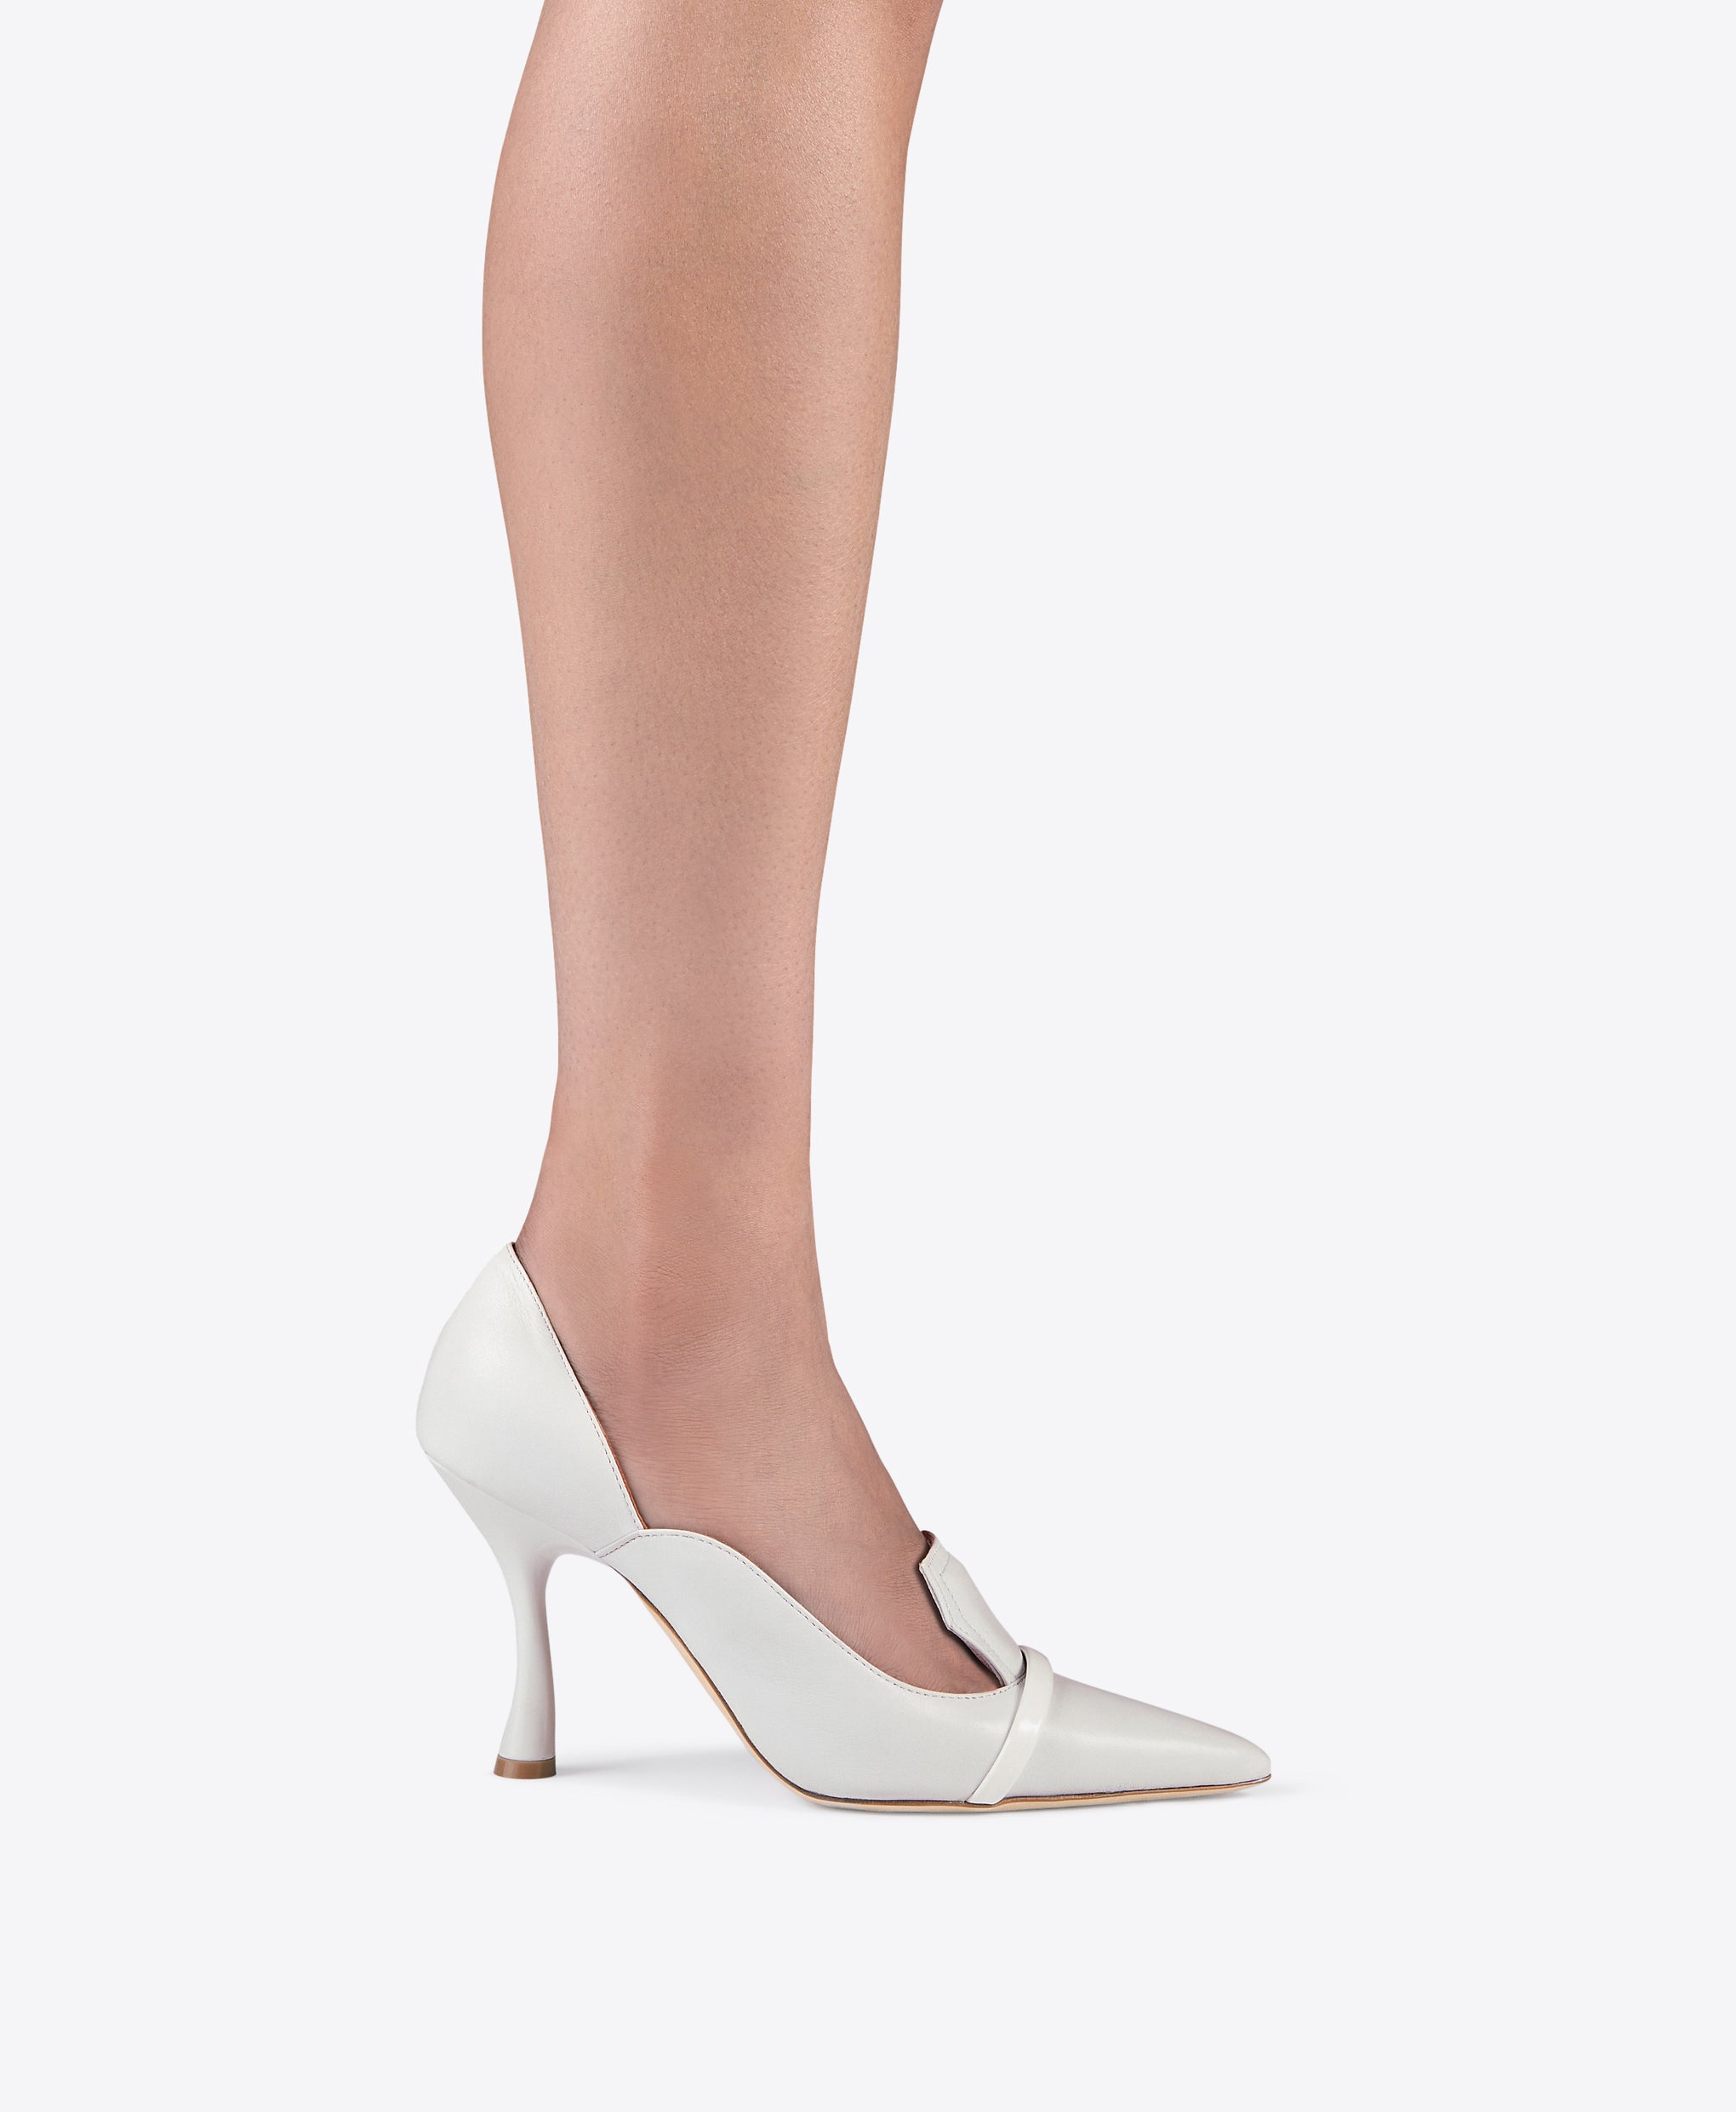 Women's White Leather Heeled Pumps Malone Souliers